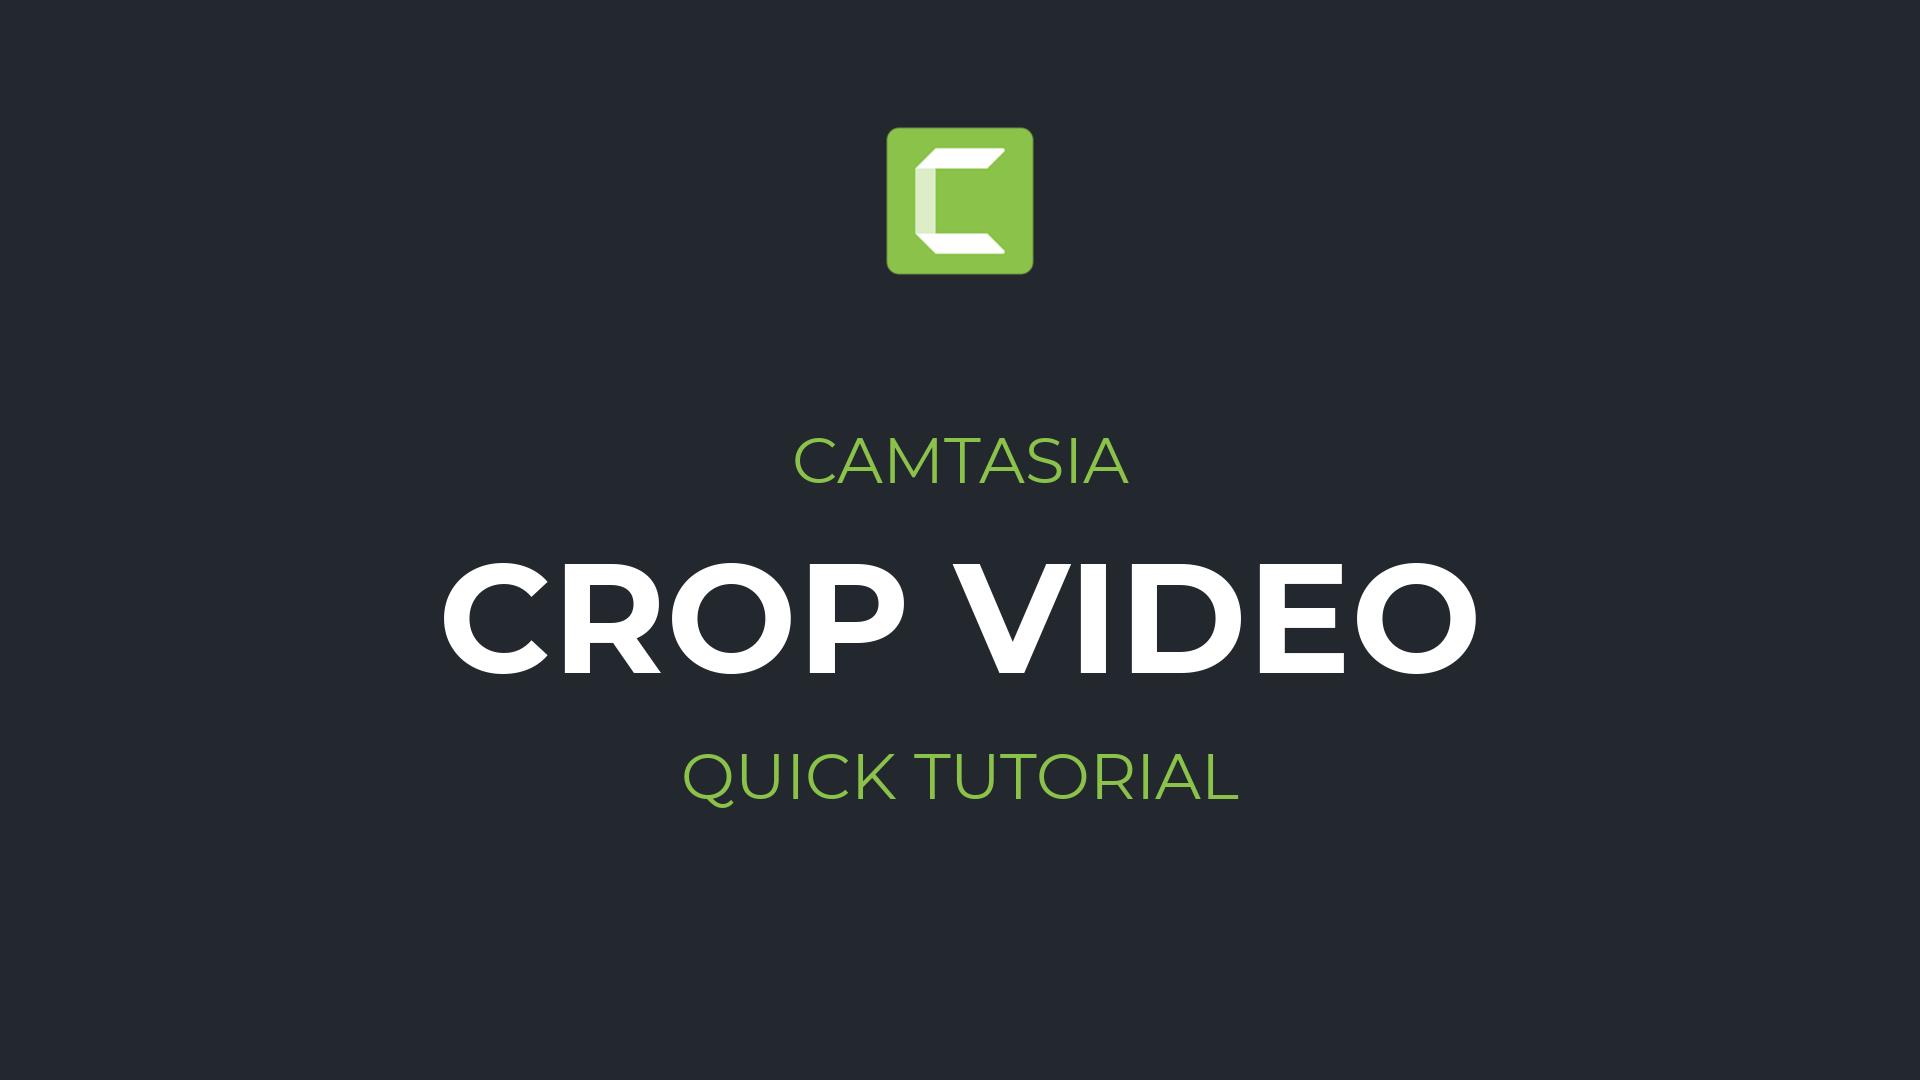 How to crop a video in Camtasia | Tutorial for Absolute Beginners